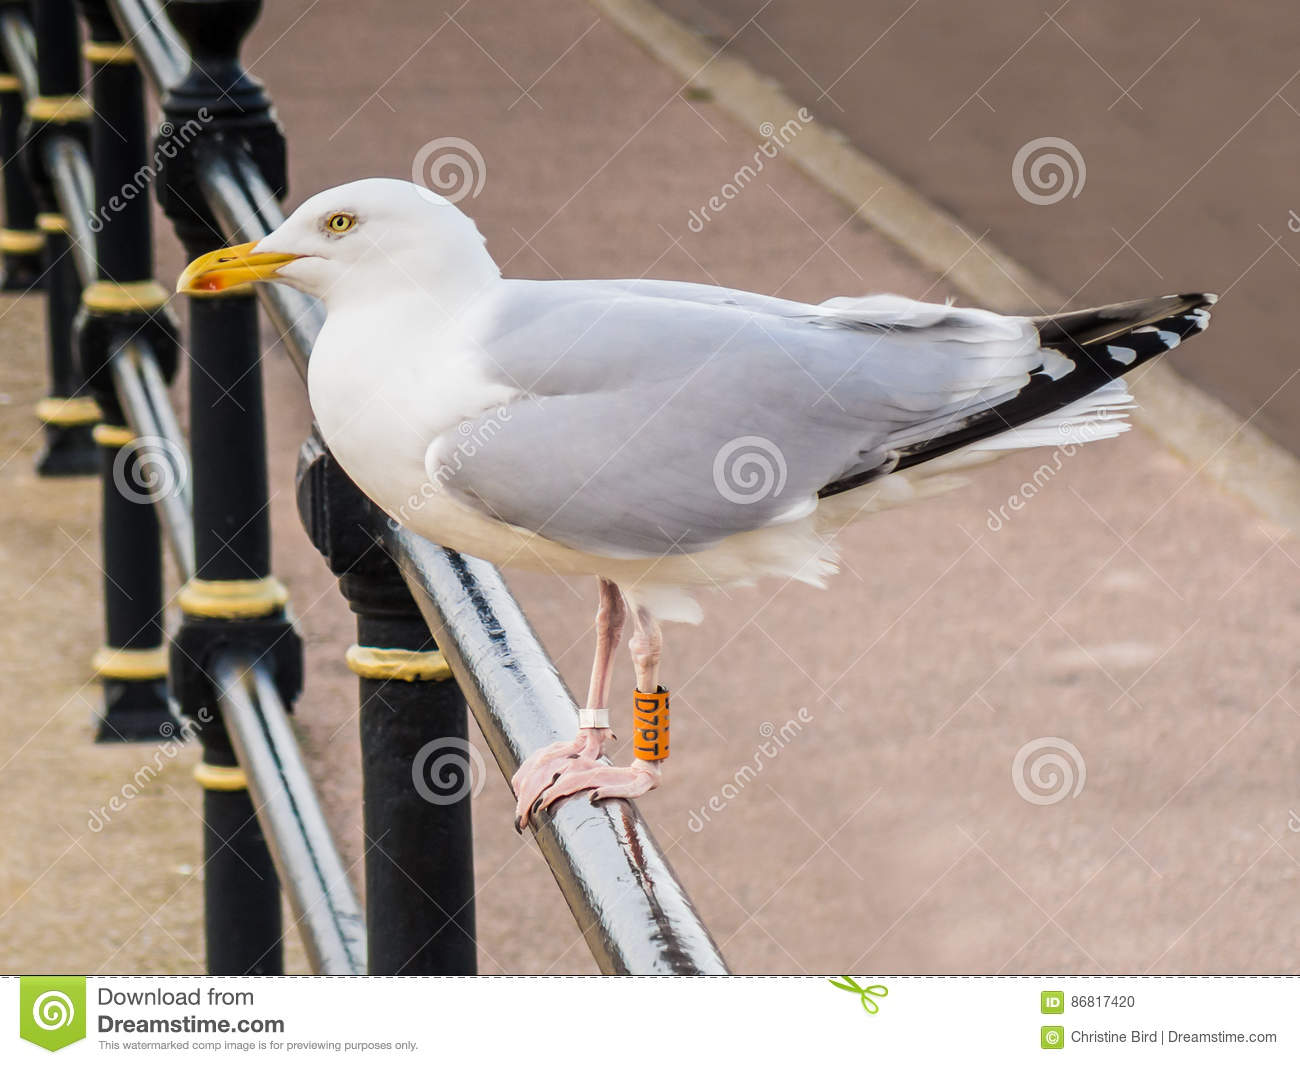 Why do seagulls have tags on their legs?